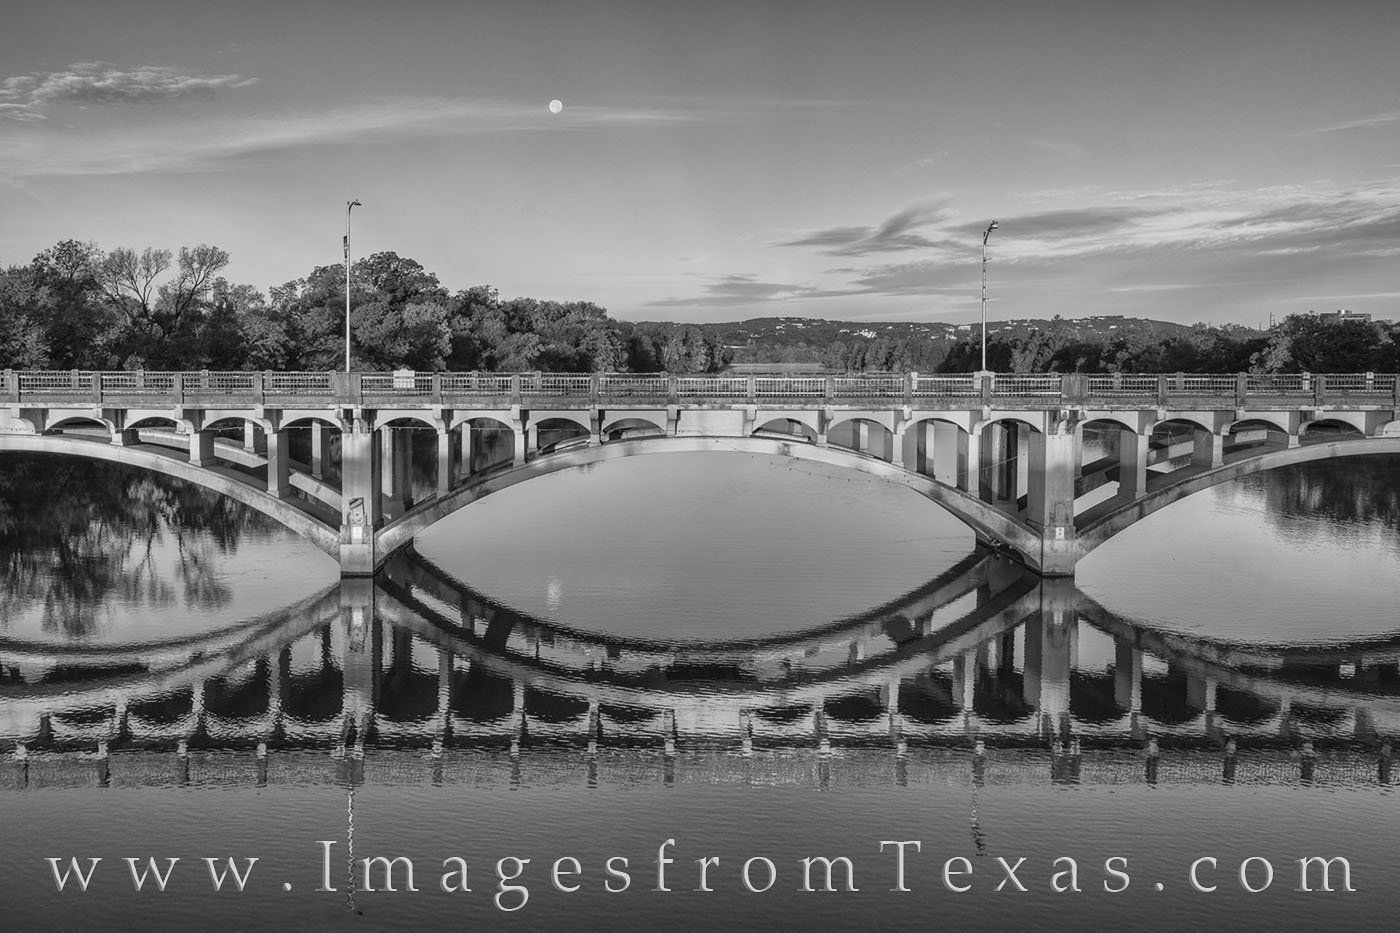 This black and white image from Austin, Texas, shows the curves and architecture of Lamar Bridge. Ladybird Lake flows beneath...